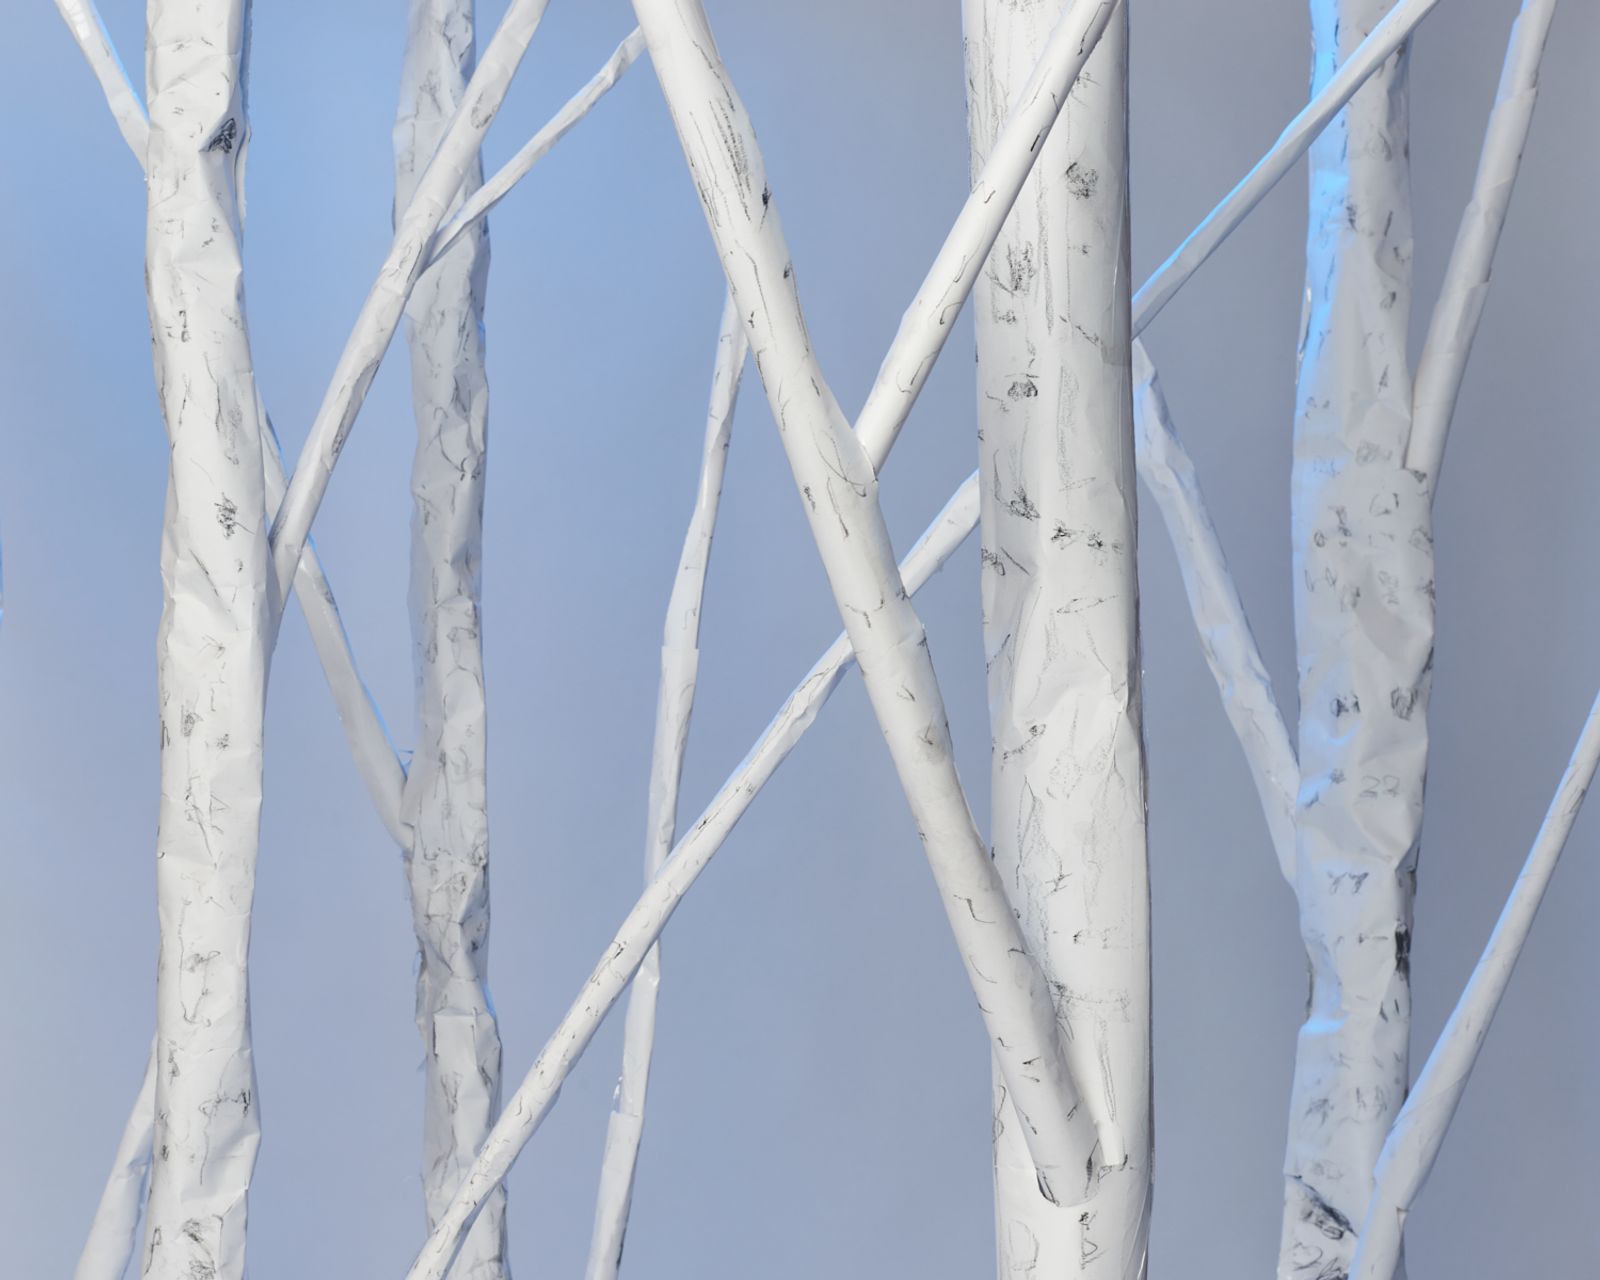 © Alexey Shlyk - It is one of my early memories - winter birch trees. Back in the days winters were much colder.